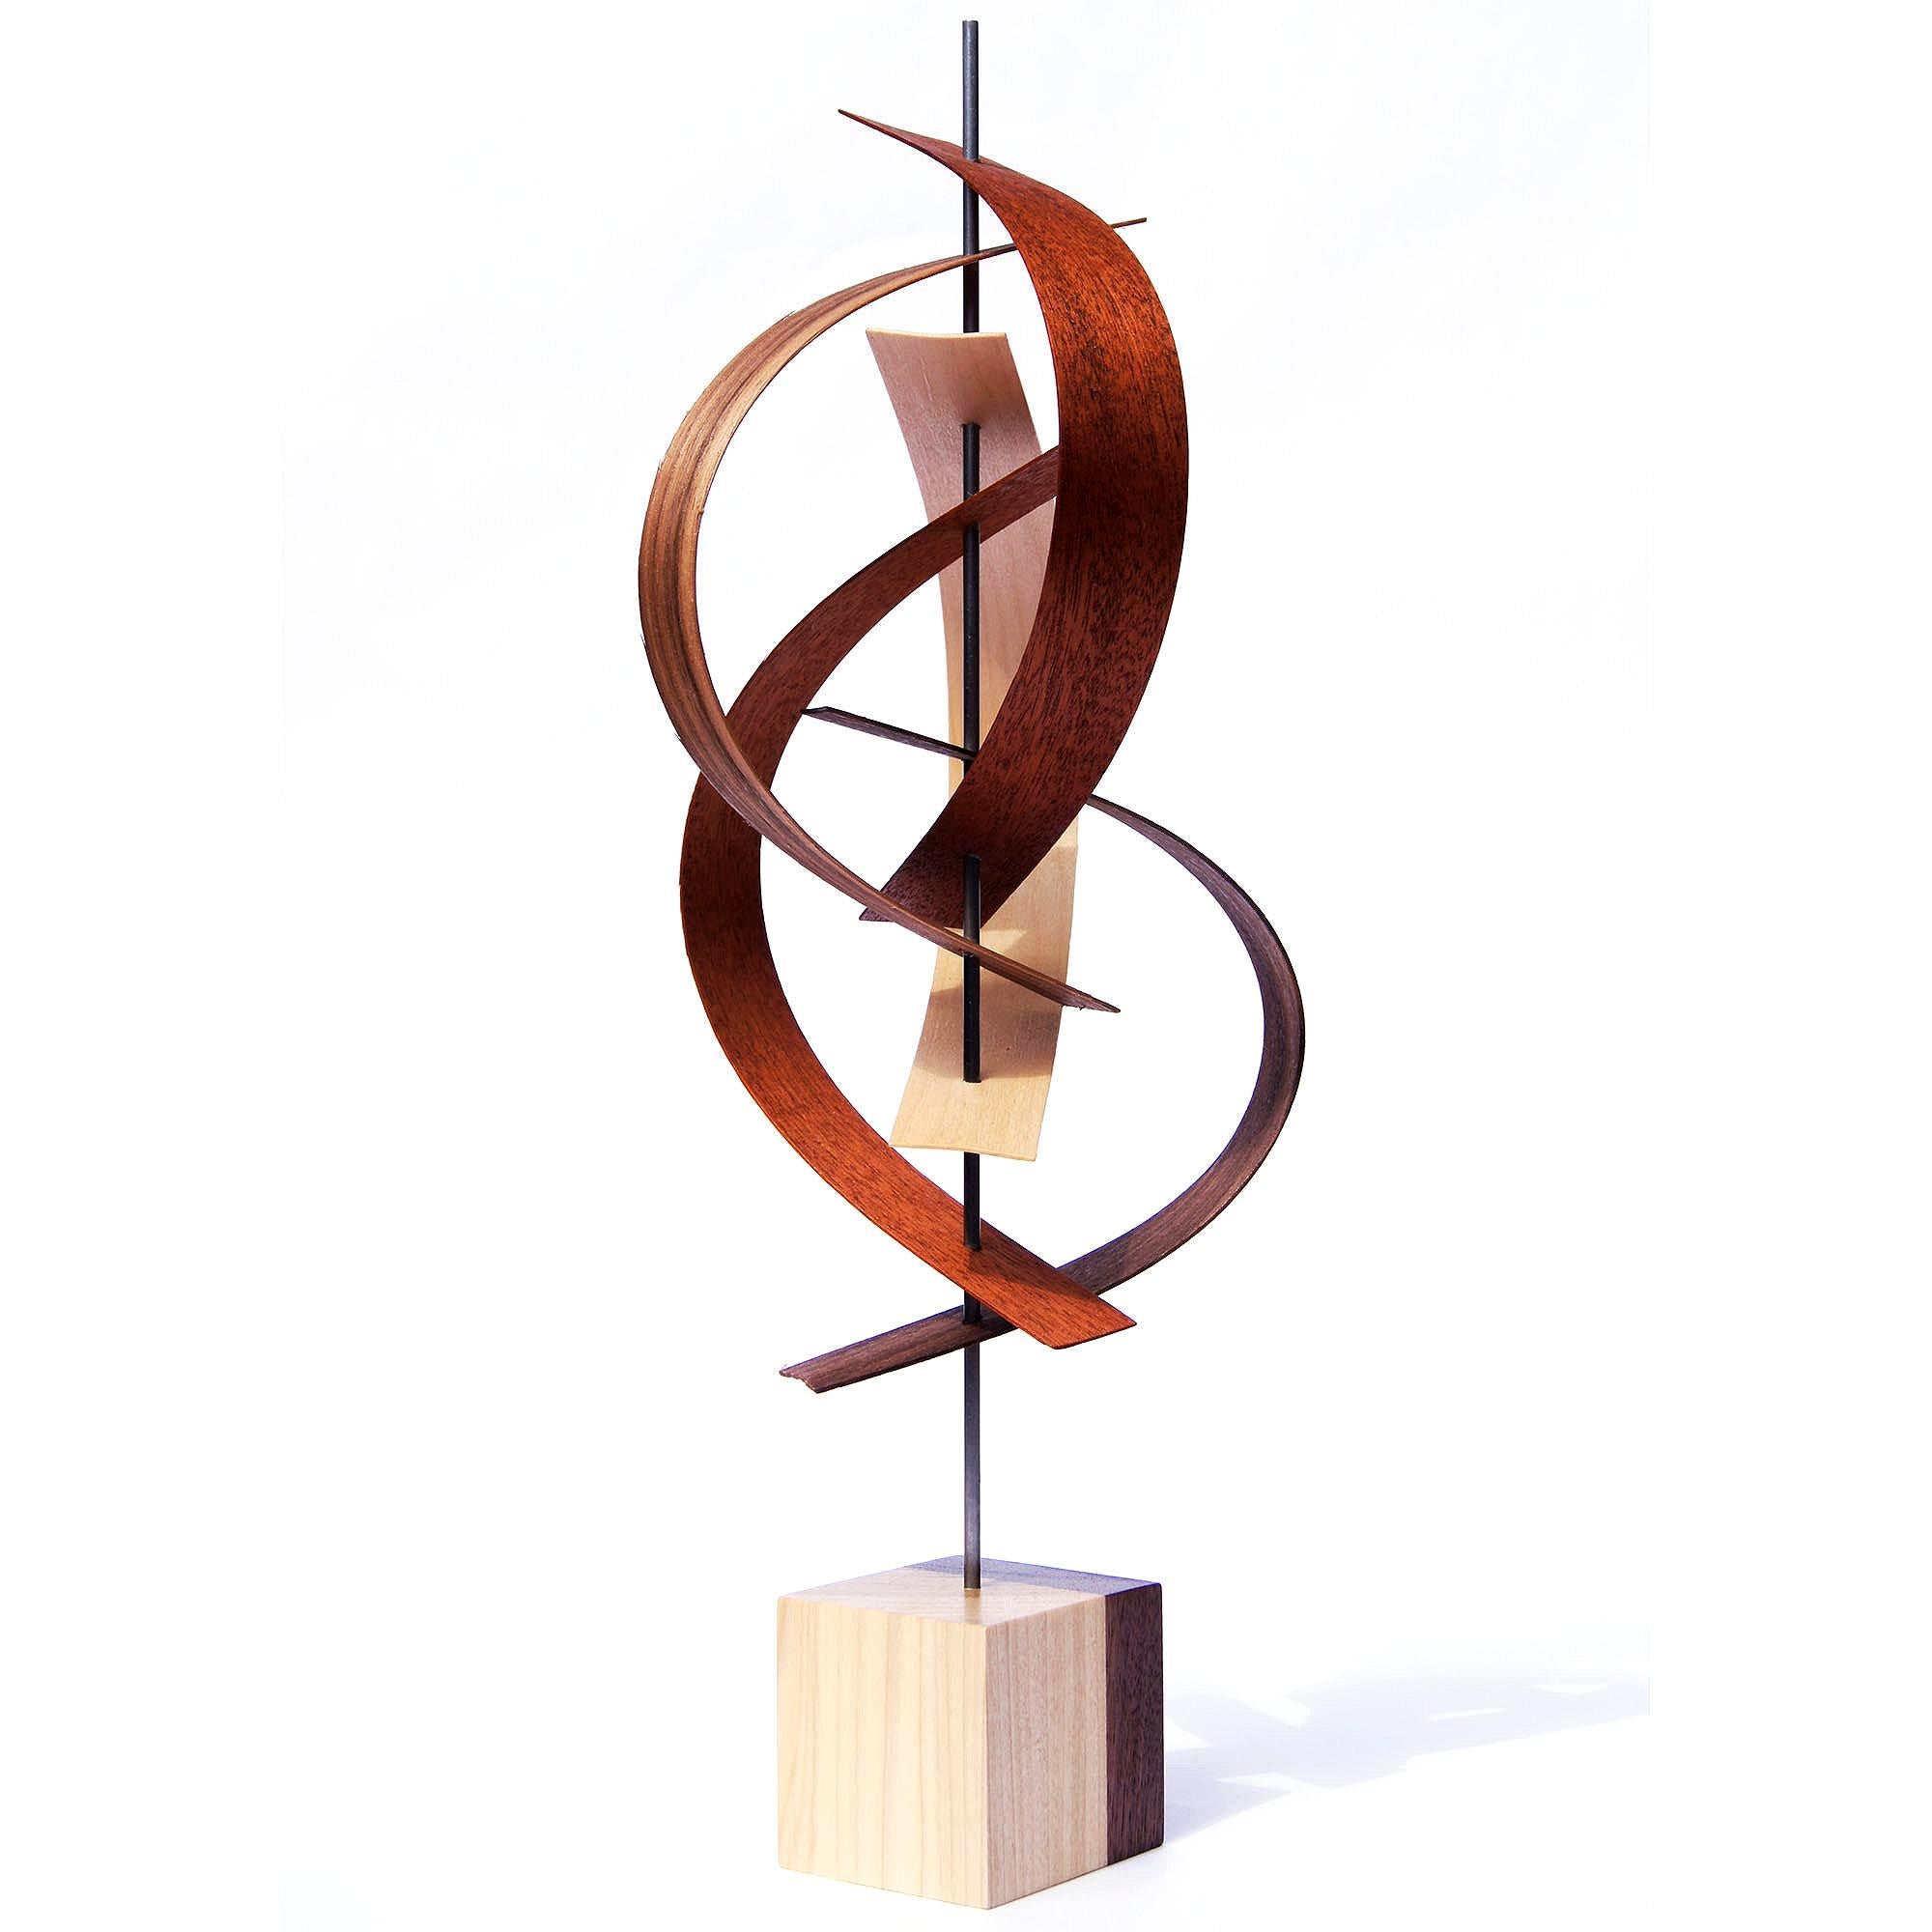 Description:  This sculpture consists of formed black walnut, maple, and mahogany wood slats. The base is 3x3x3" solid wood, walnut and poplar. This sculpture is an open-edition multiple original; hand-made by the artist.
Title: Sails

Artist